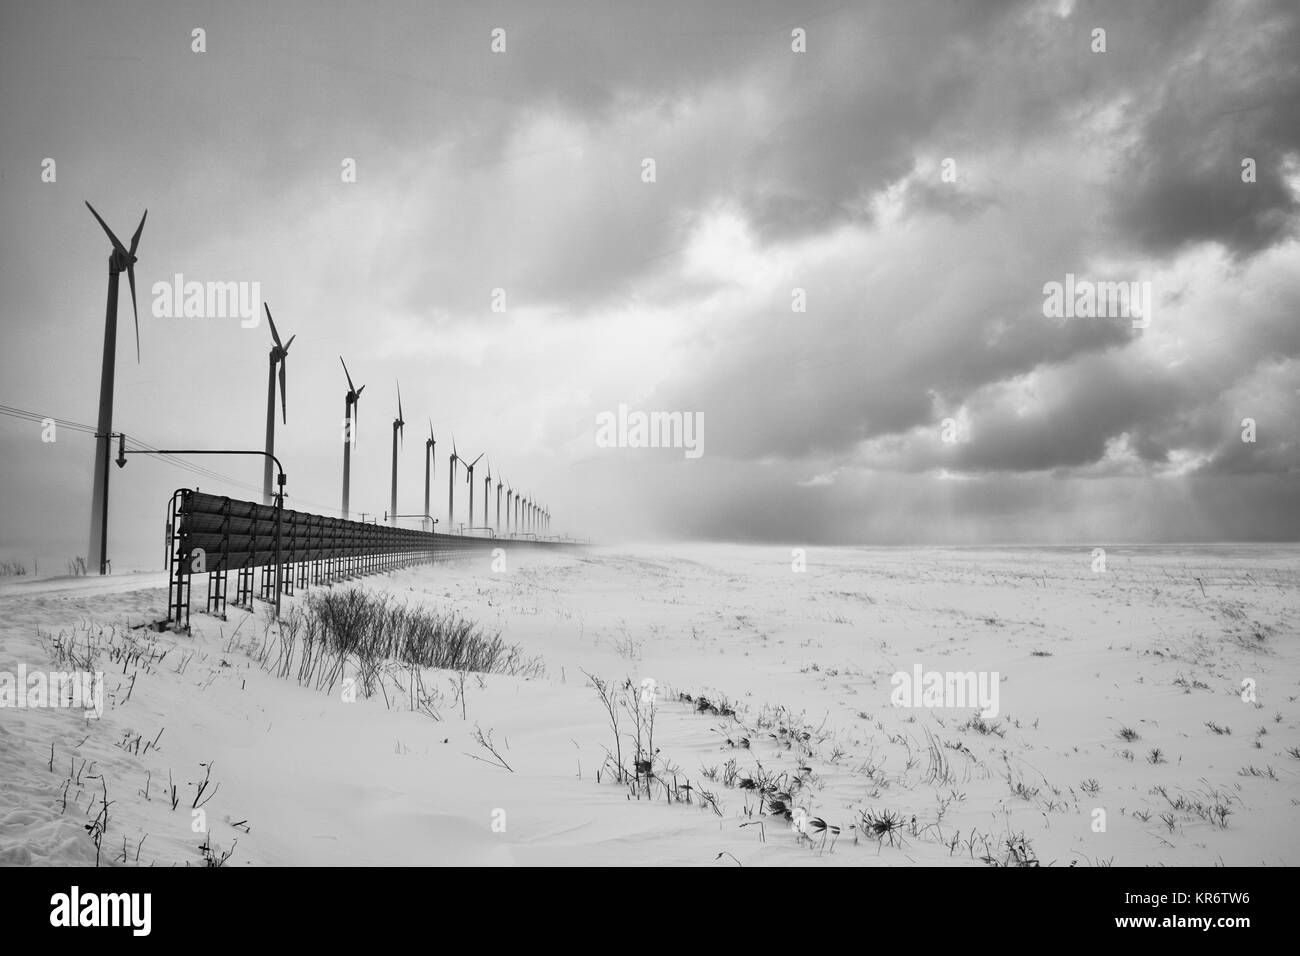 Snow-covered winter landscape under a cloudy sky with a row of wind turbines. Stock Photo